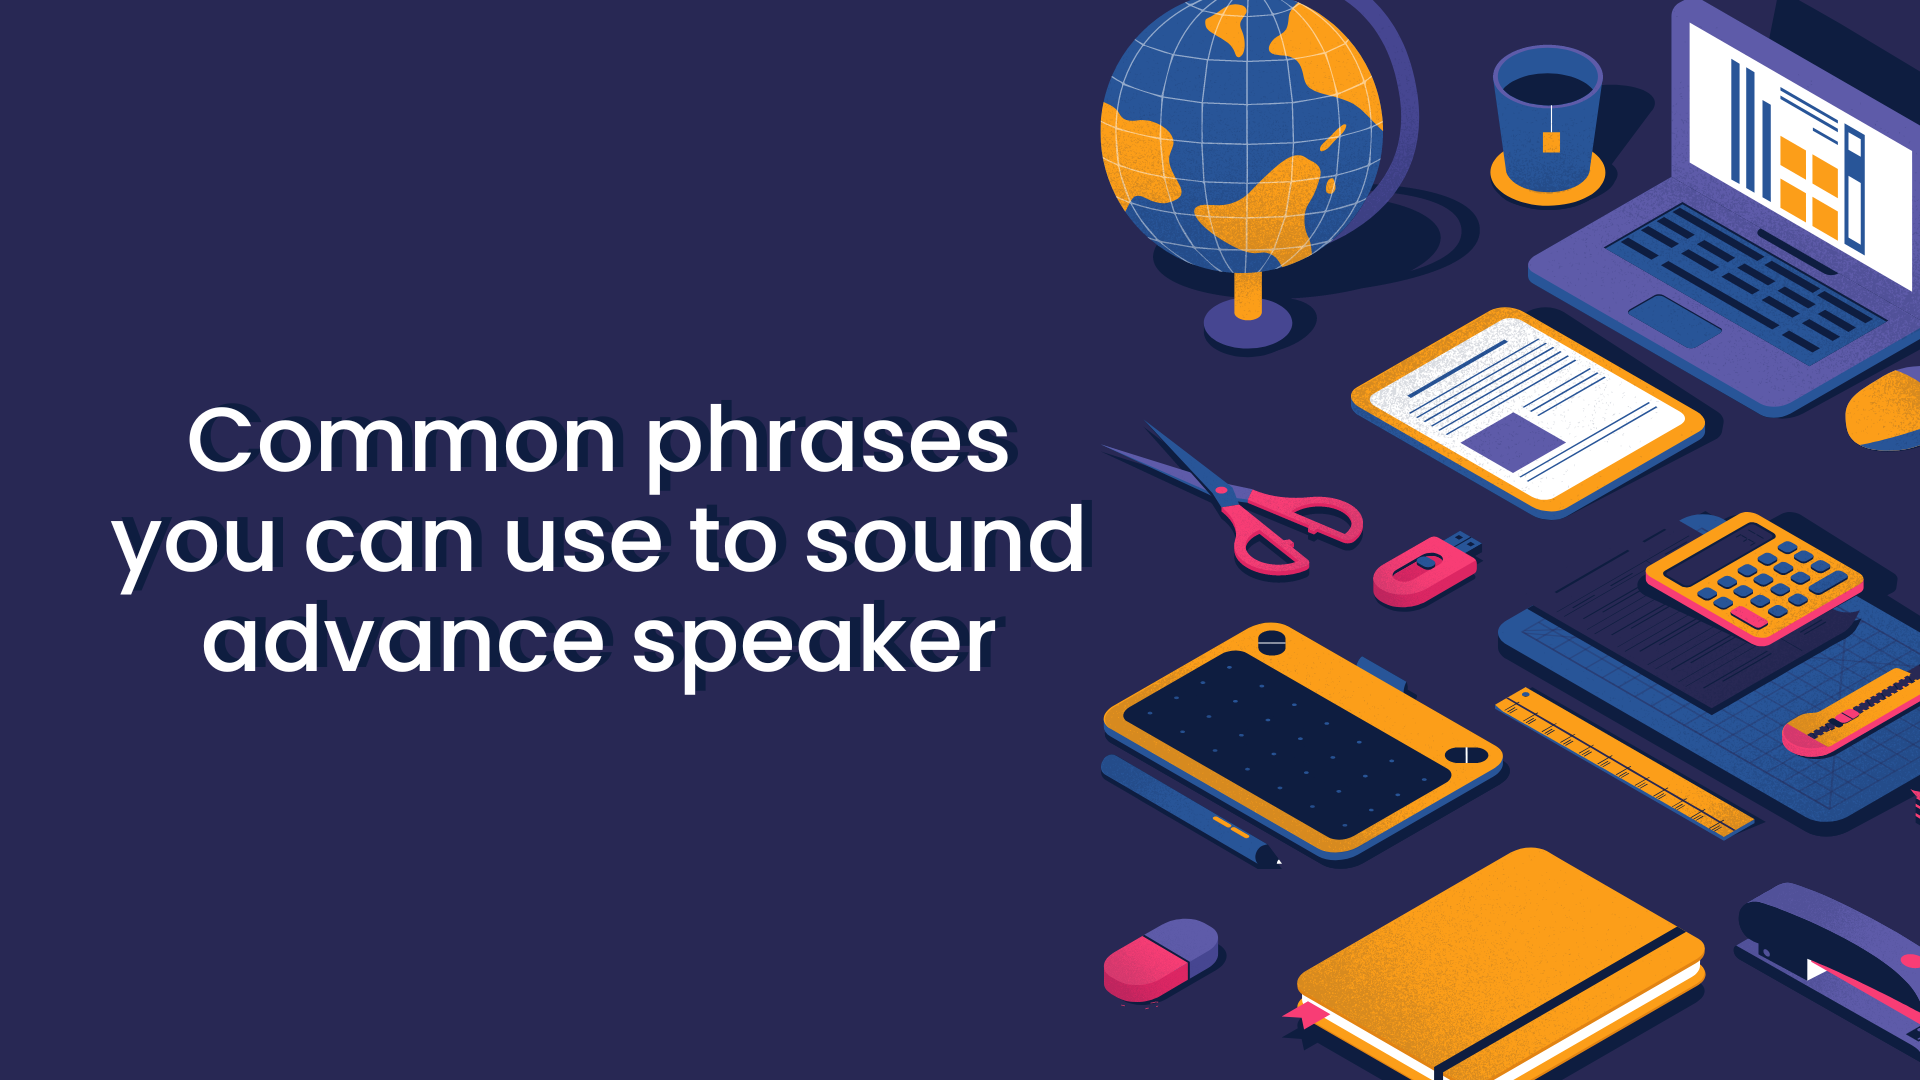 Common phrases you can use to sound advance speaker